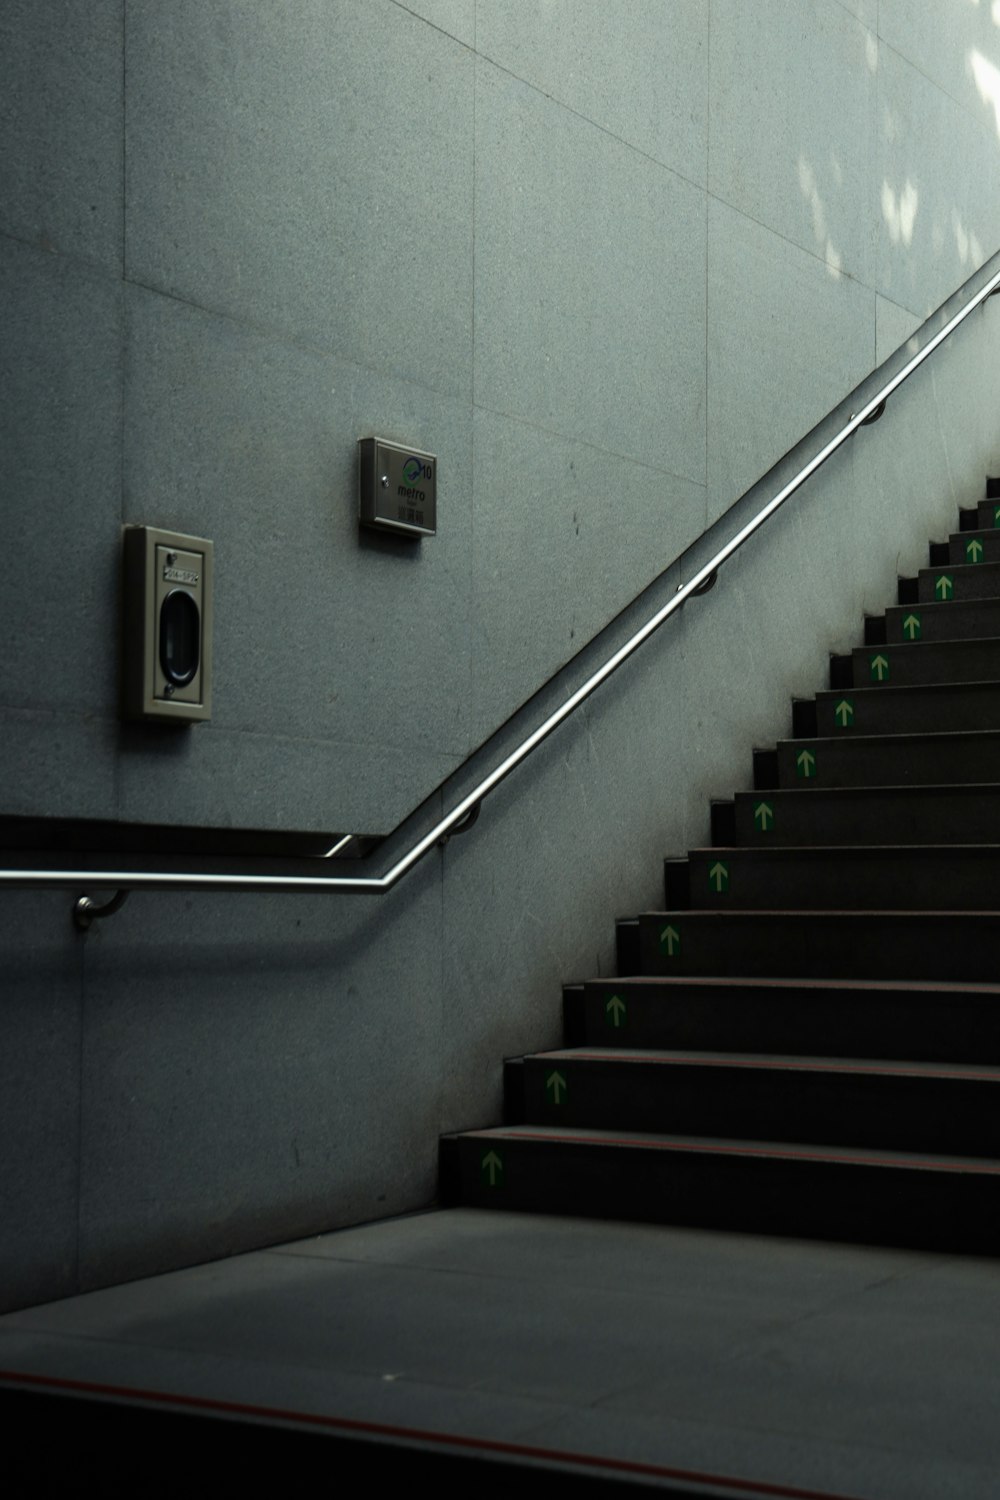 green and white staircase with stainless steel railings